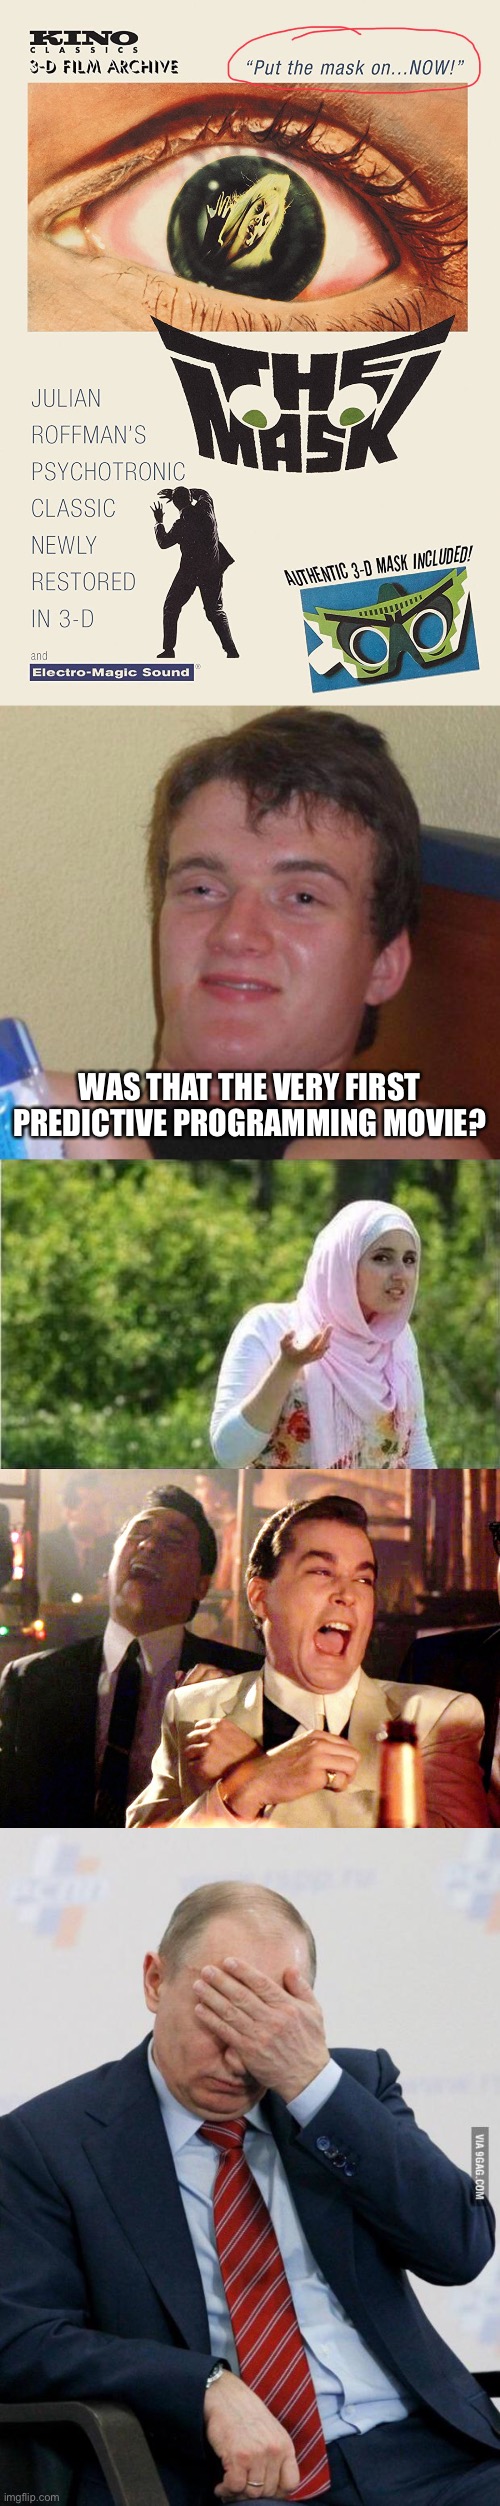 WAS THAT THE VERY FIRST PREDICTIVE PROGRAMMING MOVIE? | image tagged in stoned guy,confused muslima,memes,good fellas hilarious,putin facepalm | made w/ Imgflip meme maker